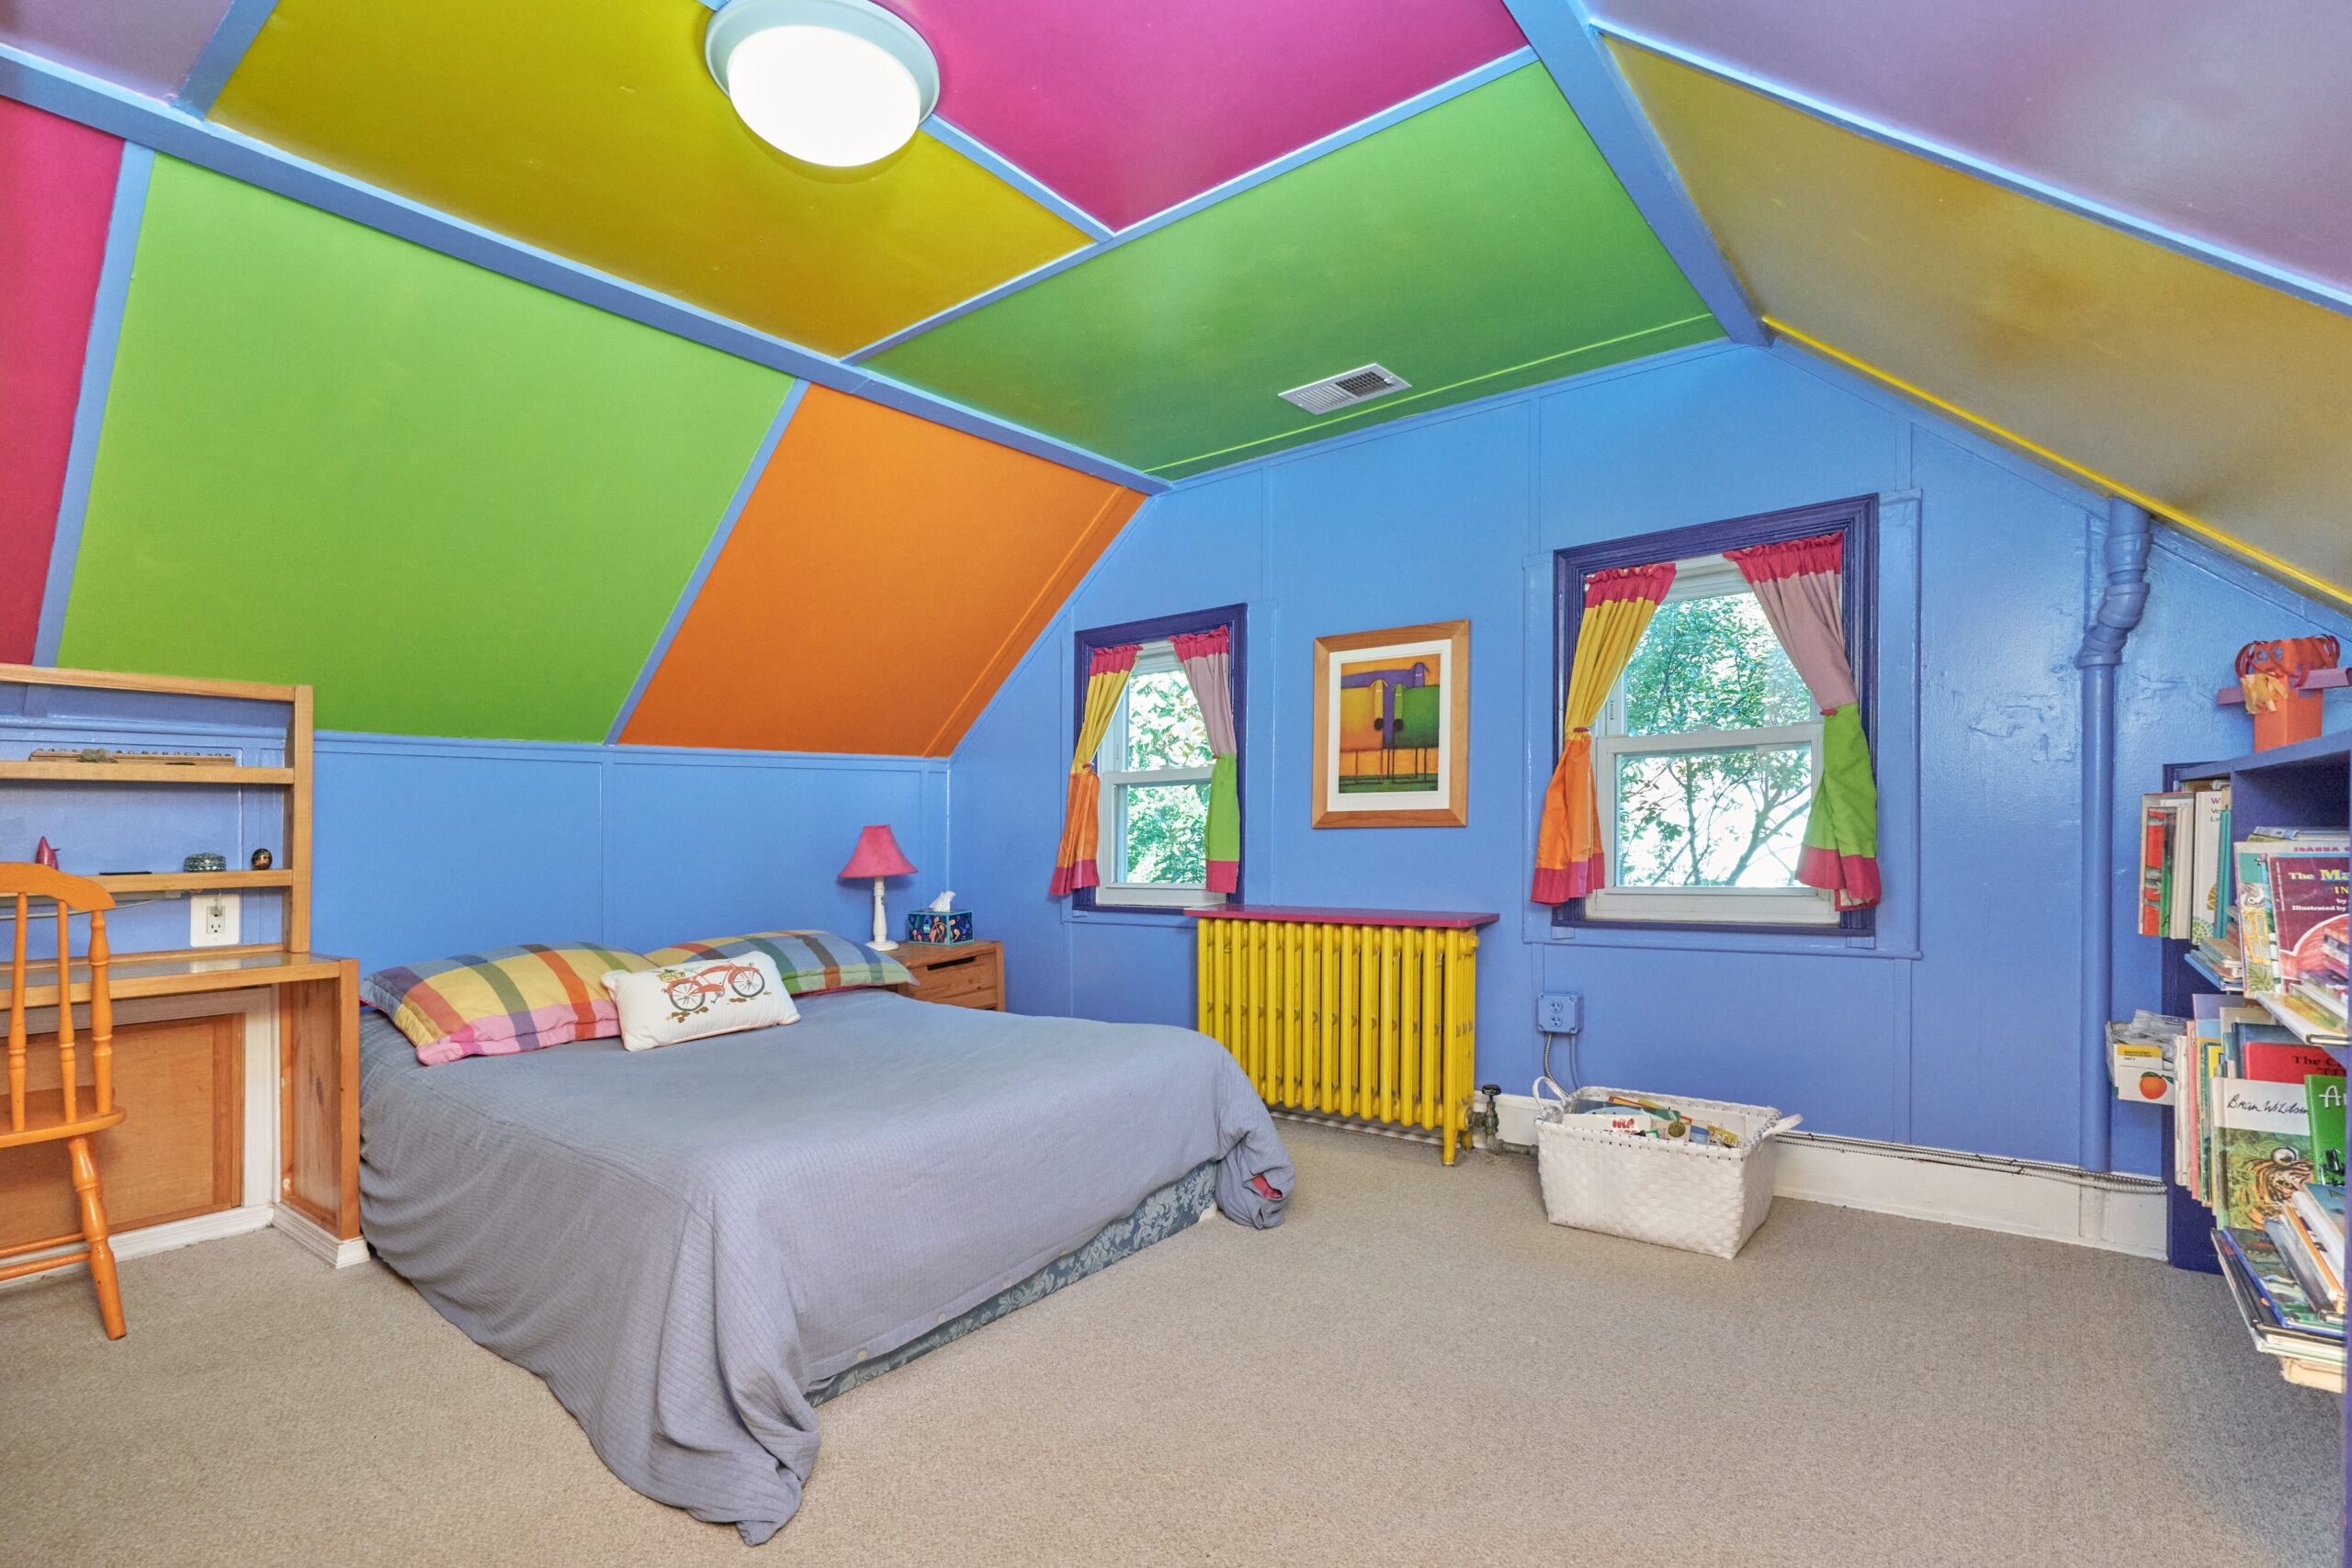 Professional interior photo of 15 N Fenwick Street - showing a top floor bedroom with vaulted ceiling painted in bright blocks of neon color